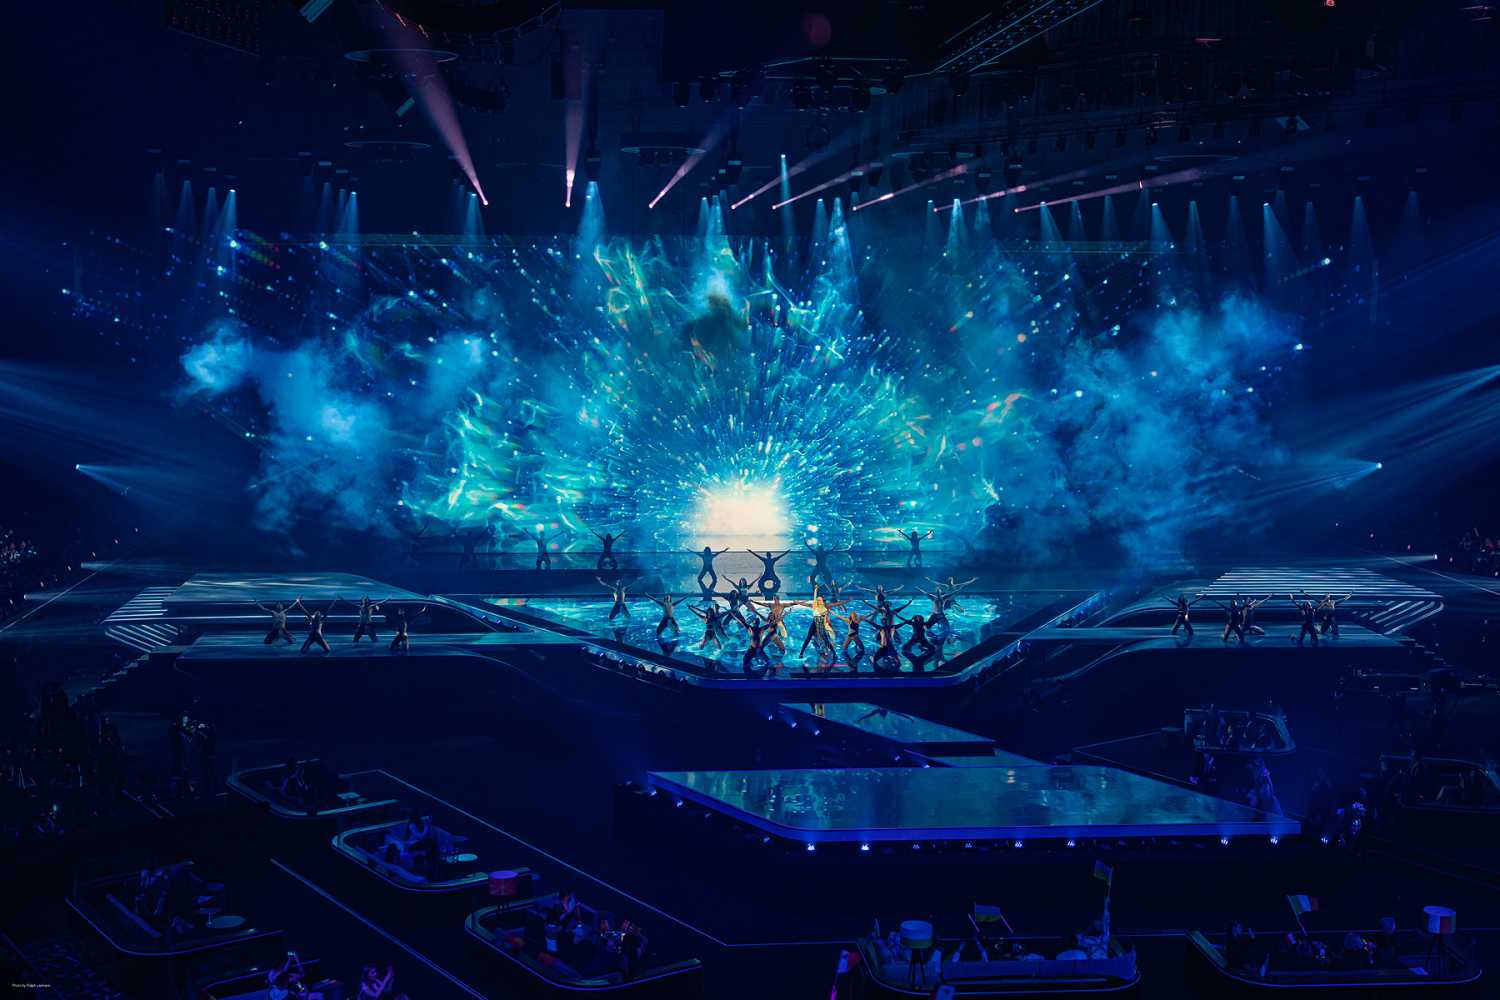 The Follow-Me 3D SIX remote tracking system was used to keep the performers in the spotlight